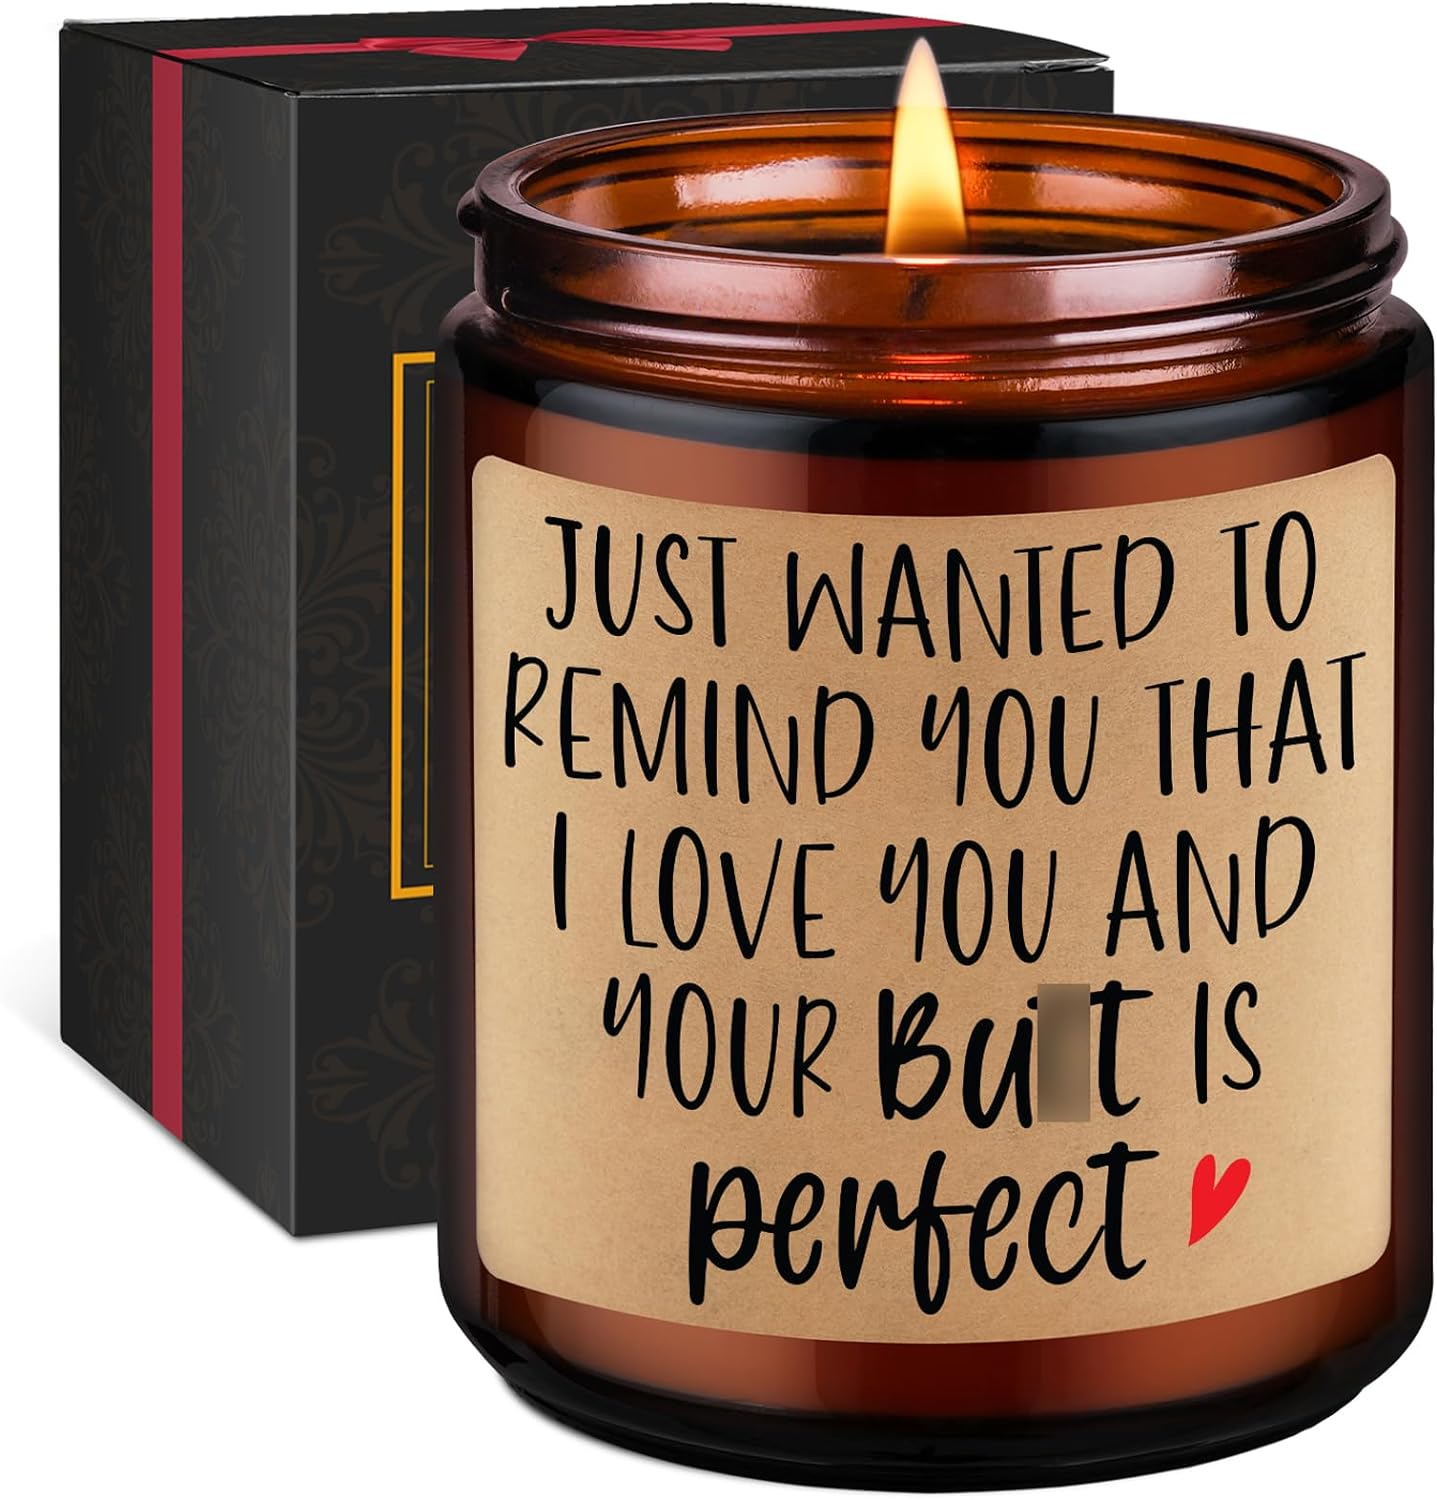 GSPY Scented Candles - Romantic Gifts, I Love You Gifts for Her, Him - Funny Anniversary, Birthday, Fathers Day, Mothers Day Gifts for Wife, Girlfriend, Husband, Boyfriend, Fiance, Women, GF